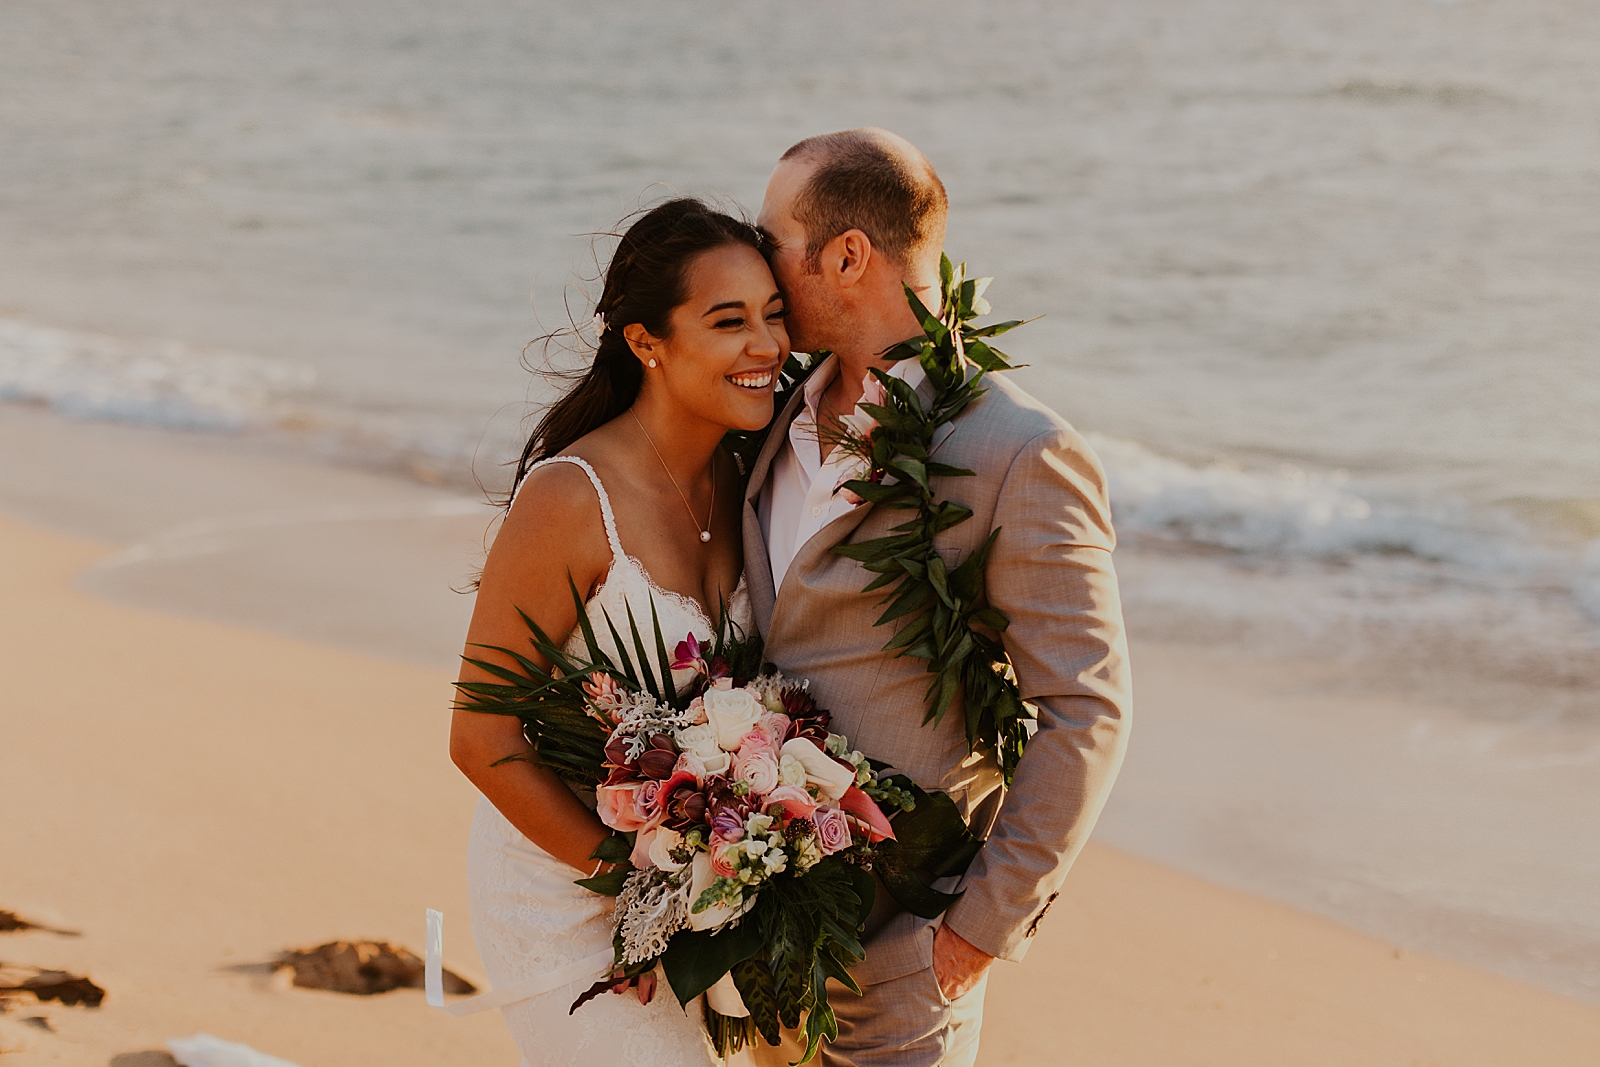 Groom holding and nuzzling bride on next to the ocean